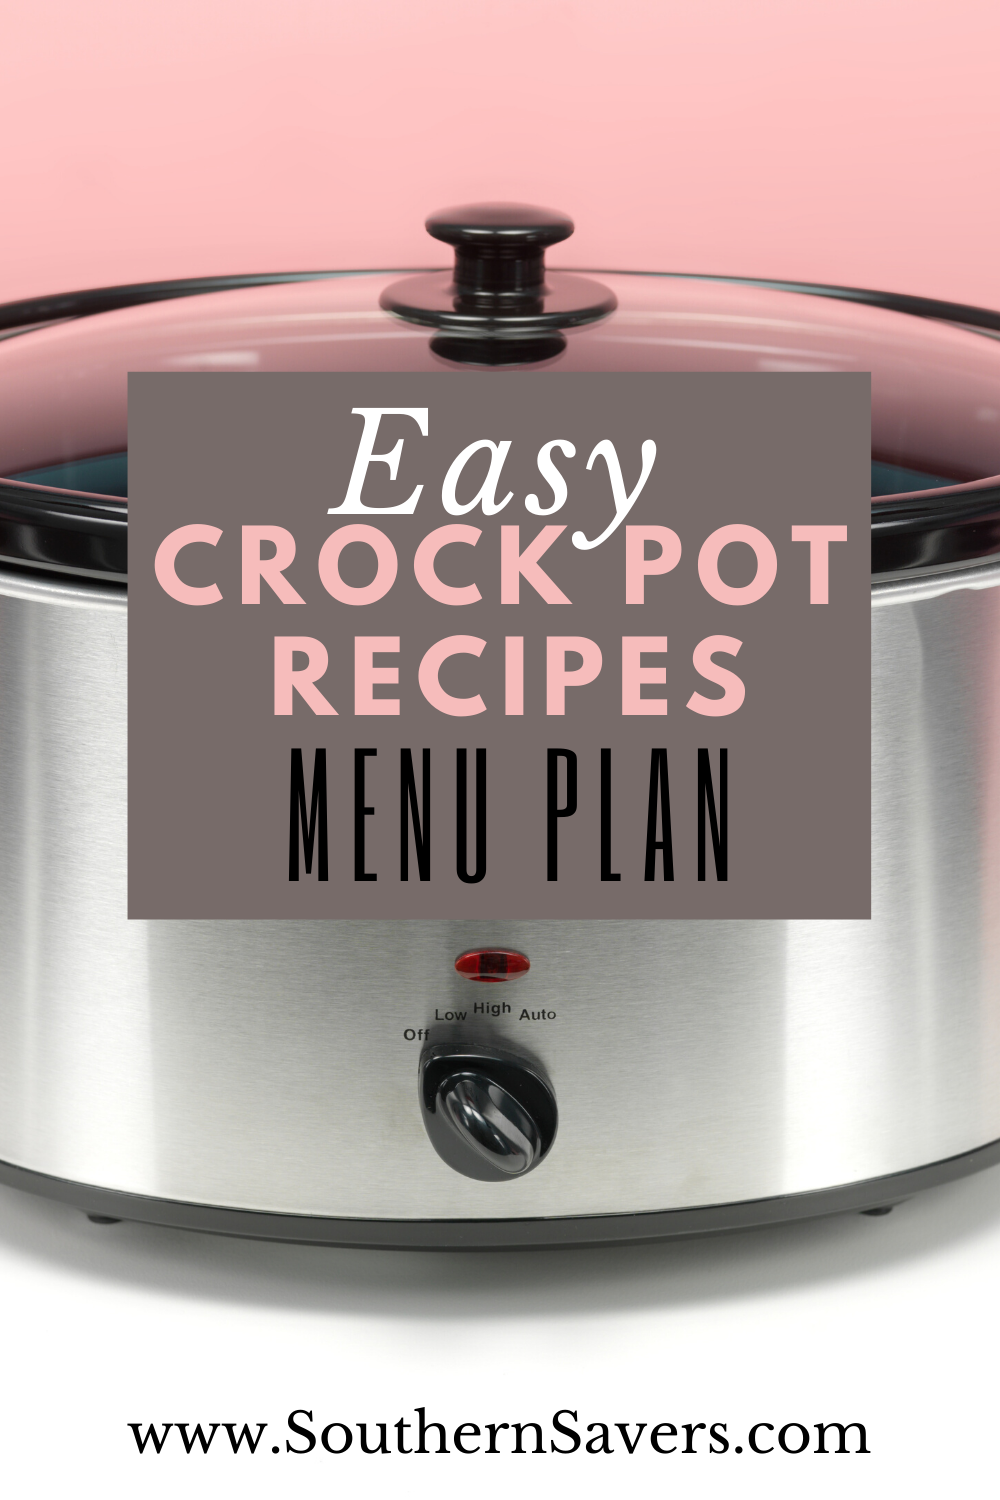 Looking for some easy dinner meals? Here's a list of yummy crock pot recipes to take the hard work out of dinner prep and simplify your mental load.